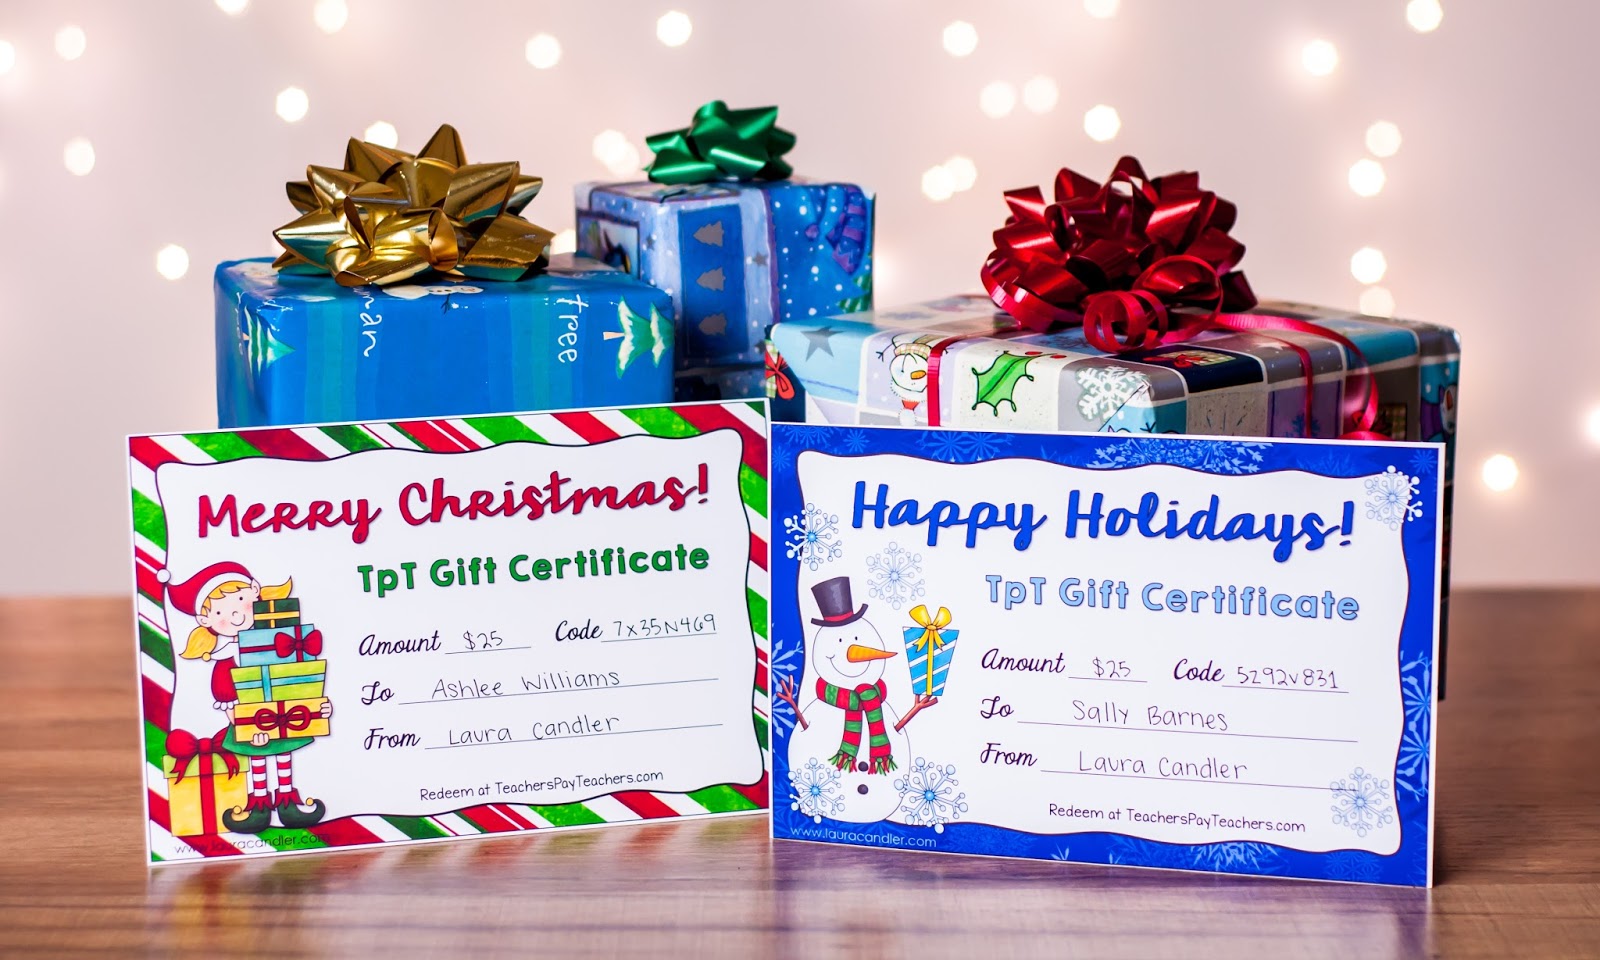 Free customizable TpT Holiday Gift Certificates! Download these festive gift certificates and purchase gift card codes from TpT. Customize each certificate by adding the recipient's name and a unique gift card code. Sure to be a hit with any educator!